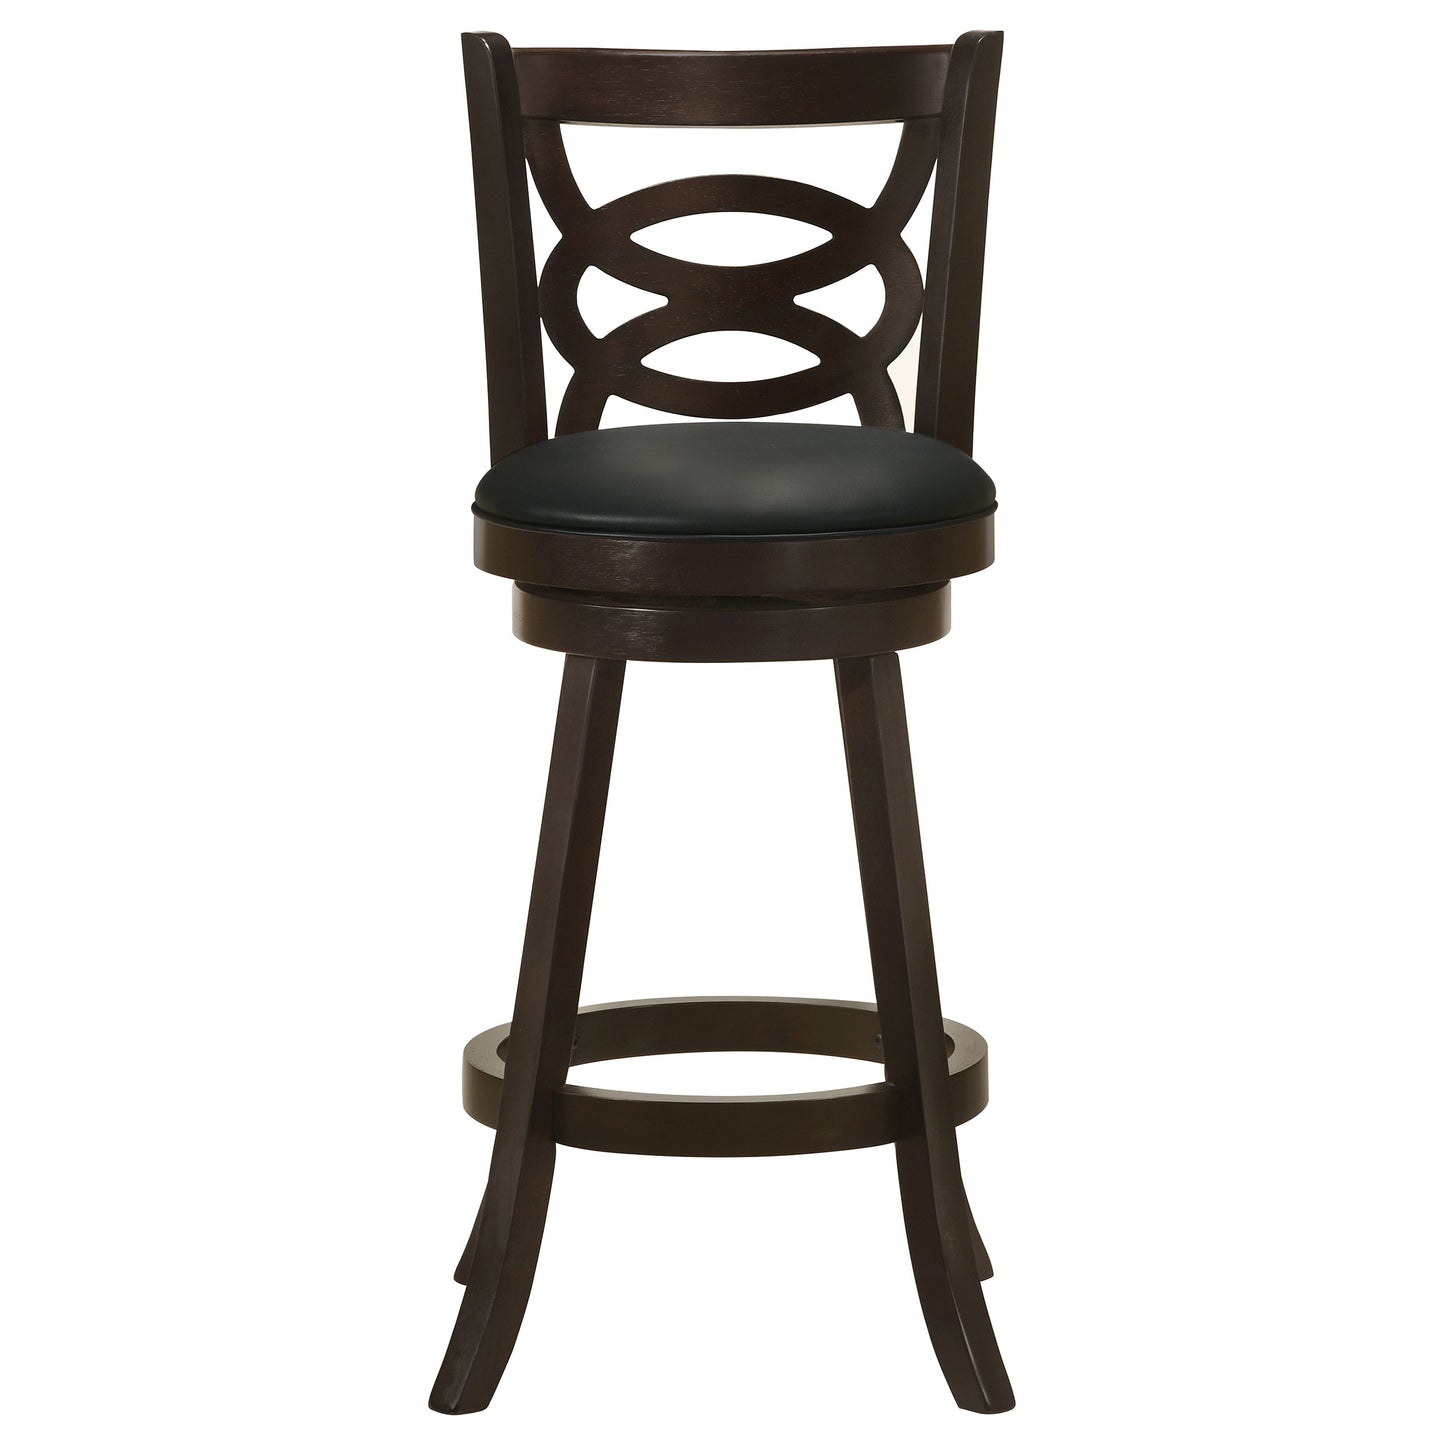 Calecita Swivel Bar Stools with Upholstered Seat Cappuccino (Set of 2)